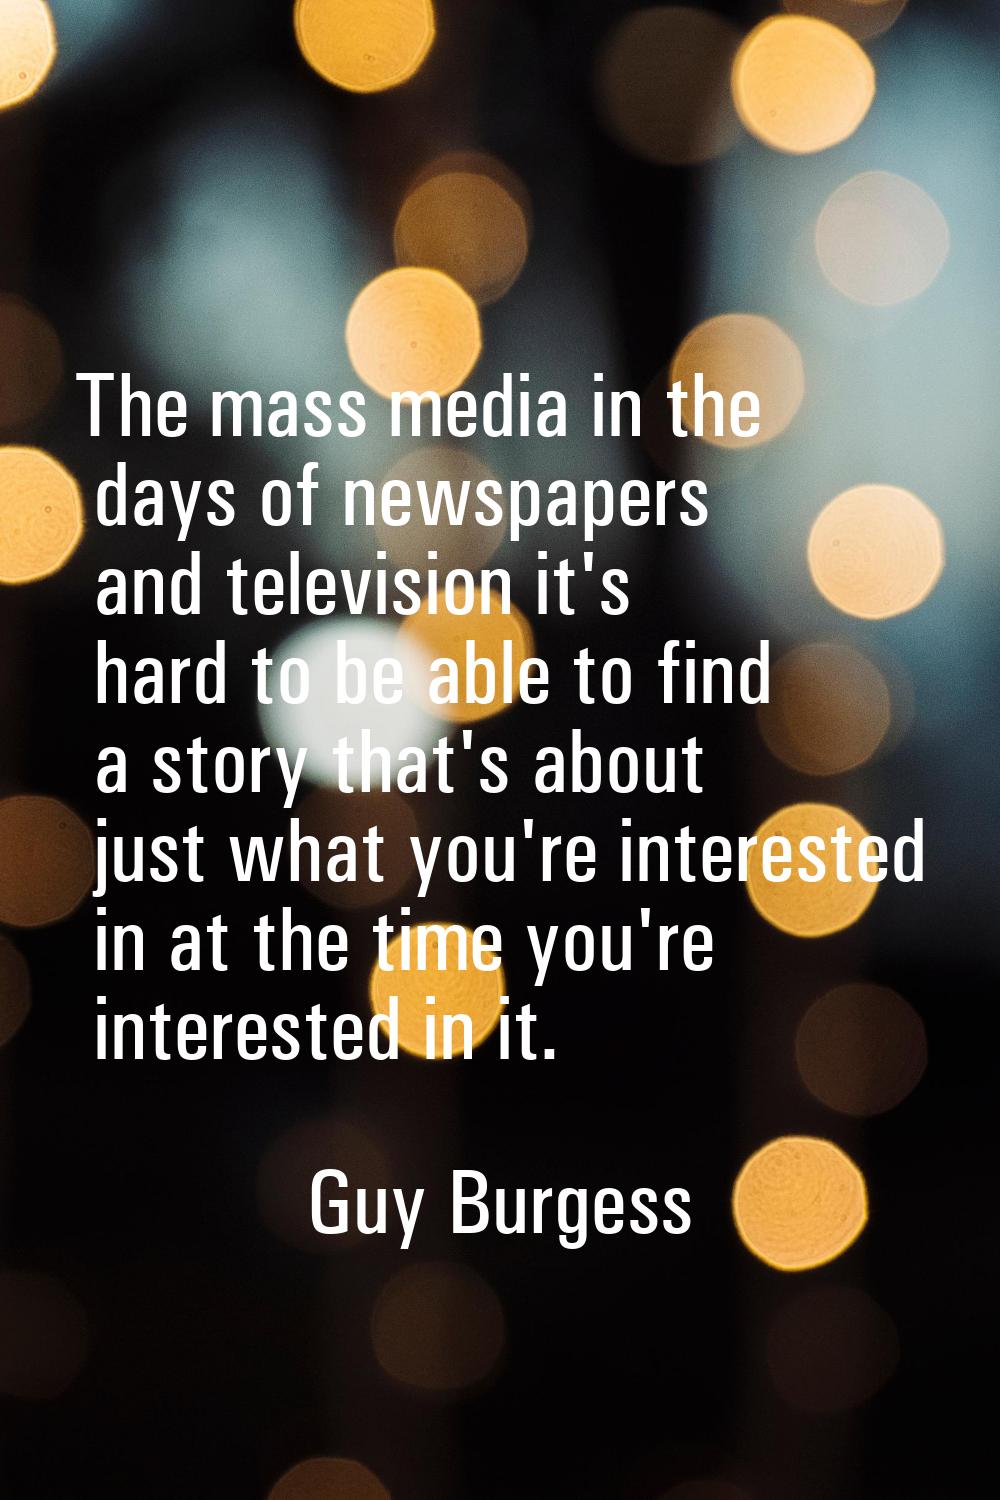 The mass media in the days of newspapers and television it's hard to be able to find a story that's